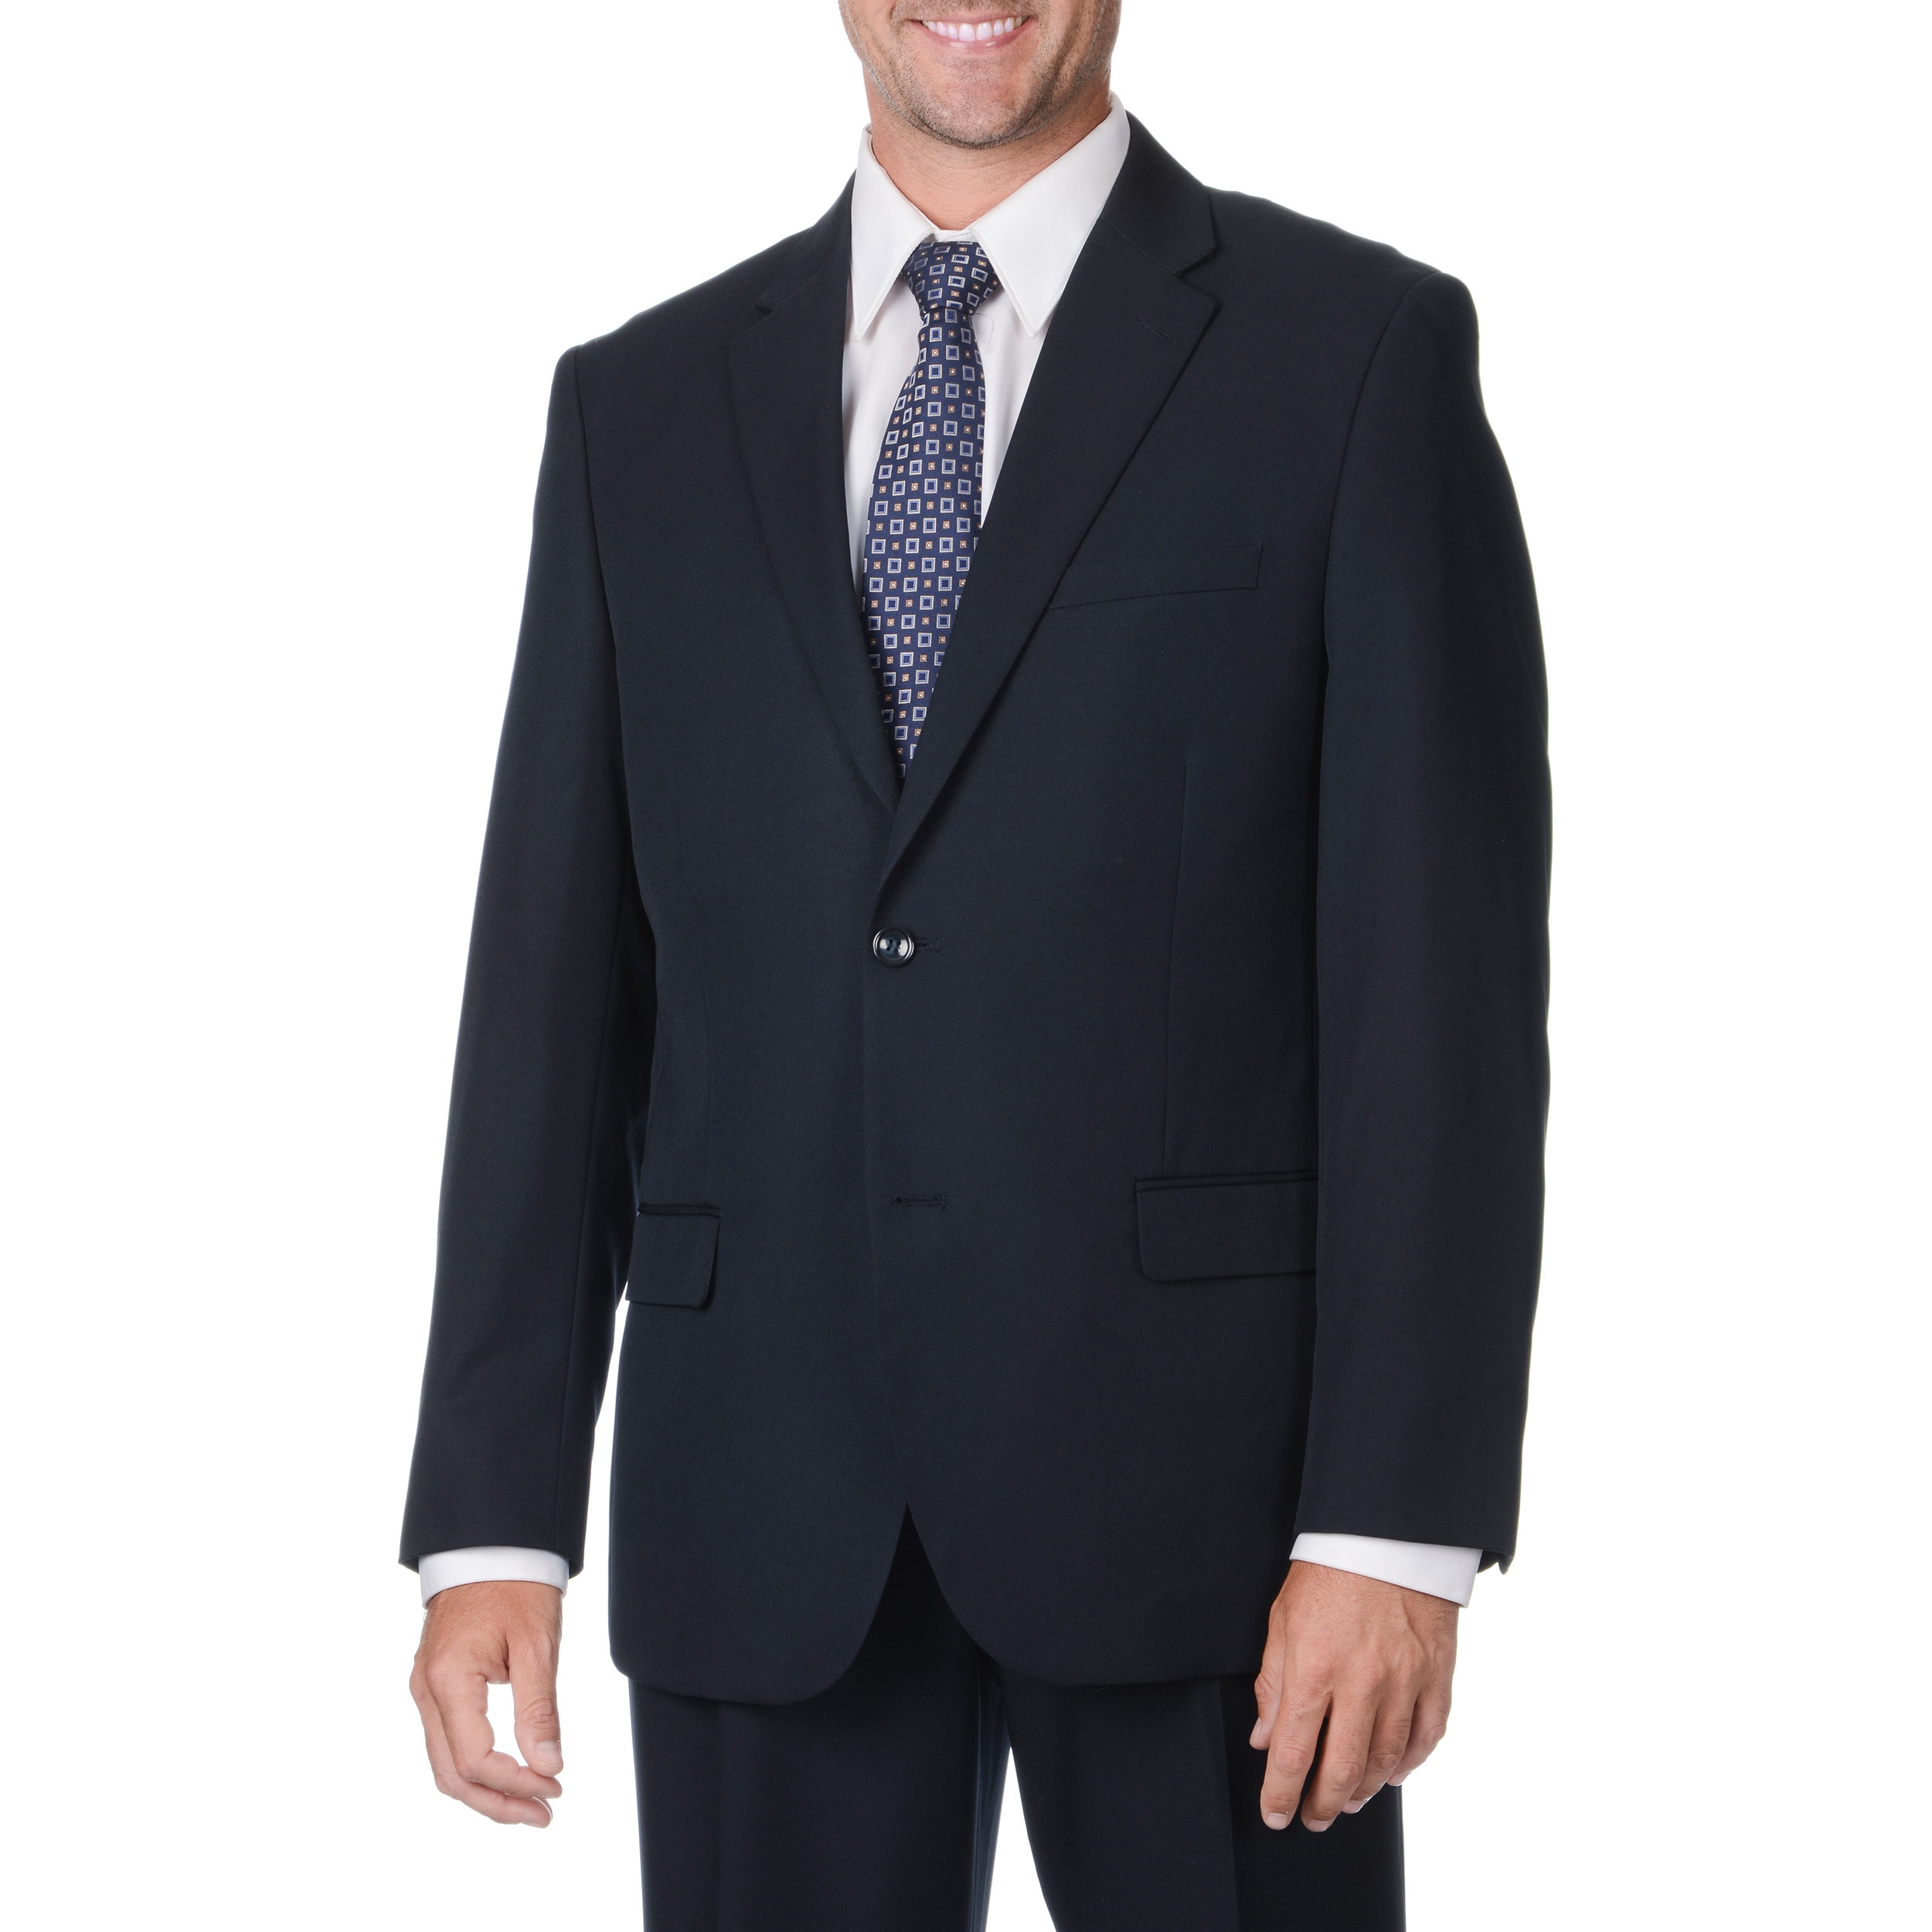 Bolzano Uomo Collezione Men&#39;s Big & Tall Navy Suit - Overstock Shopping - Big Discounts on Suits